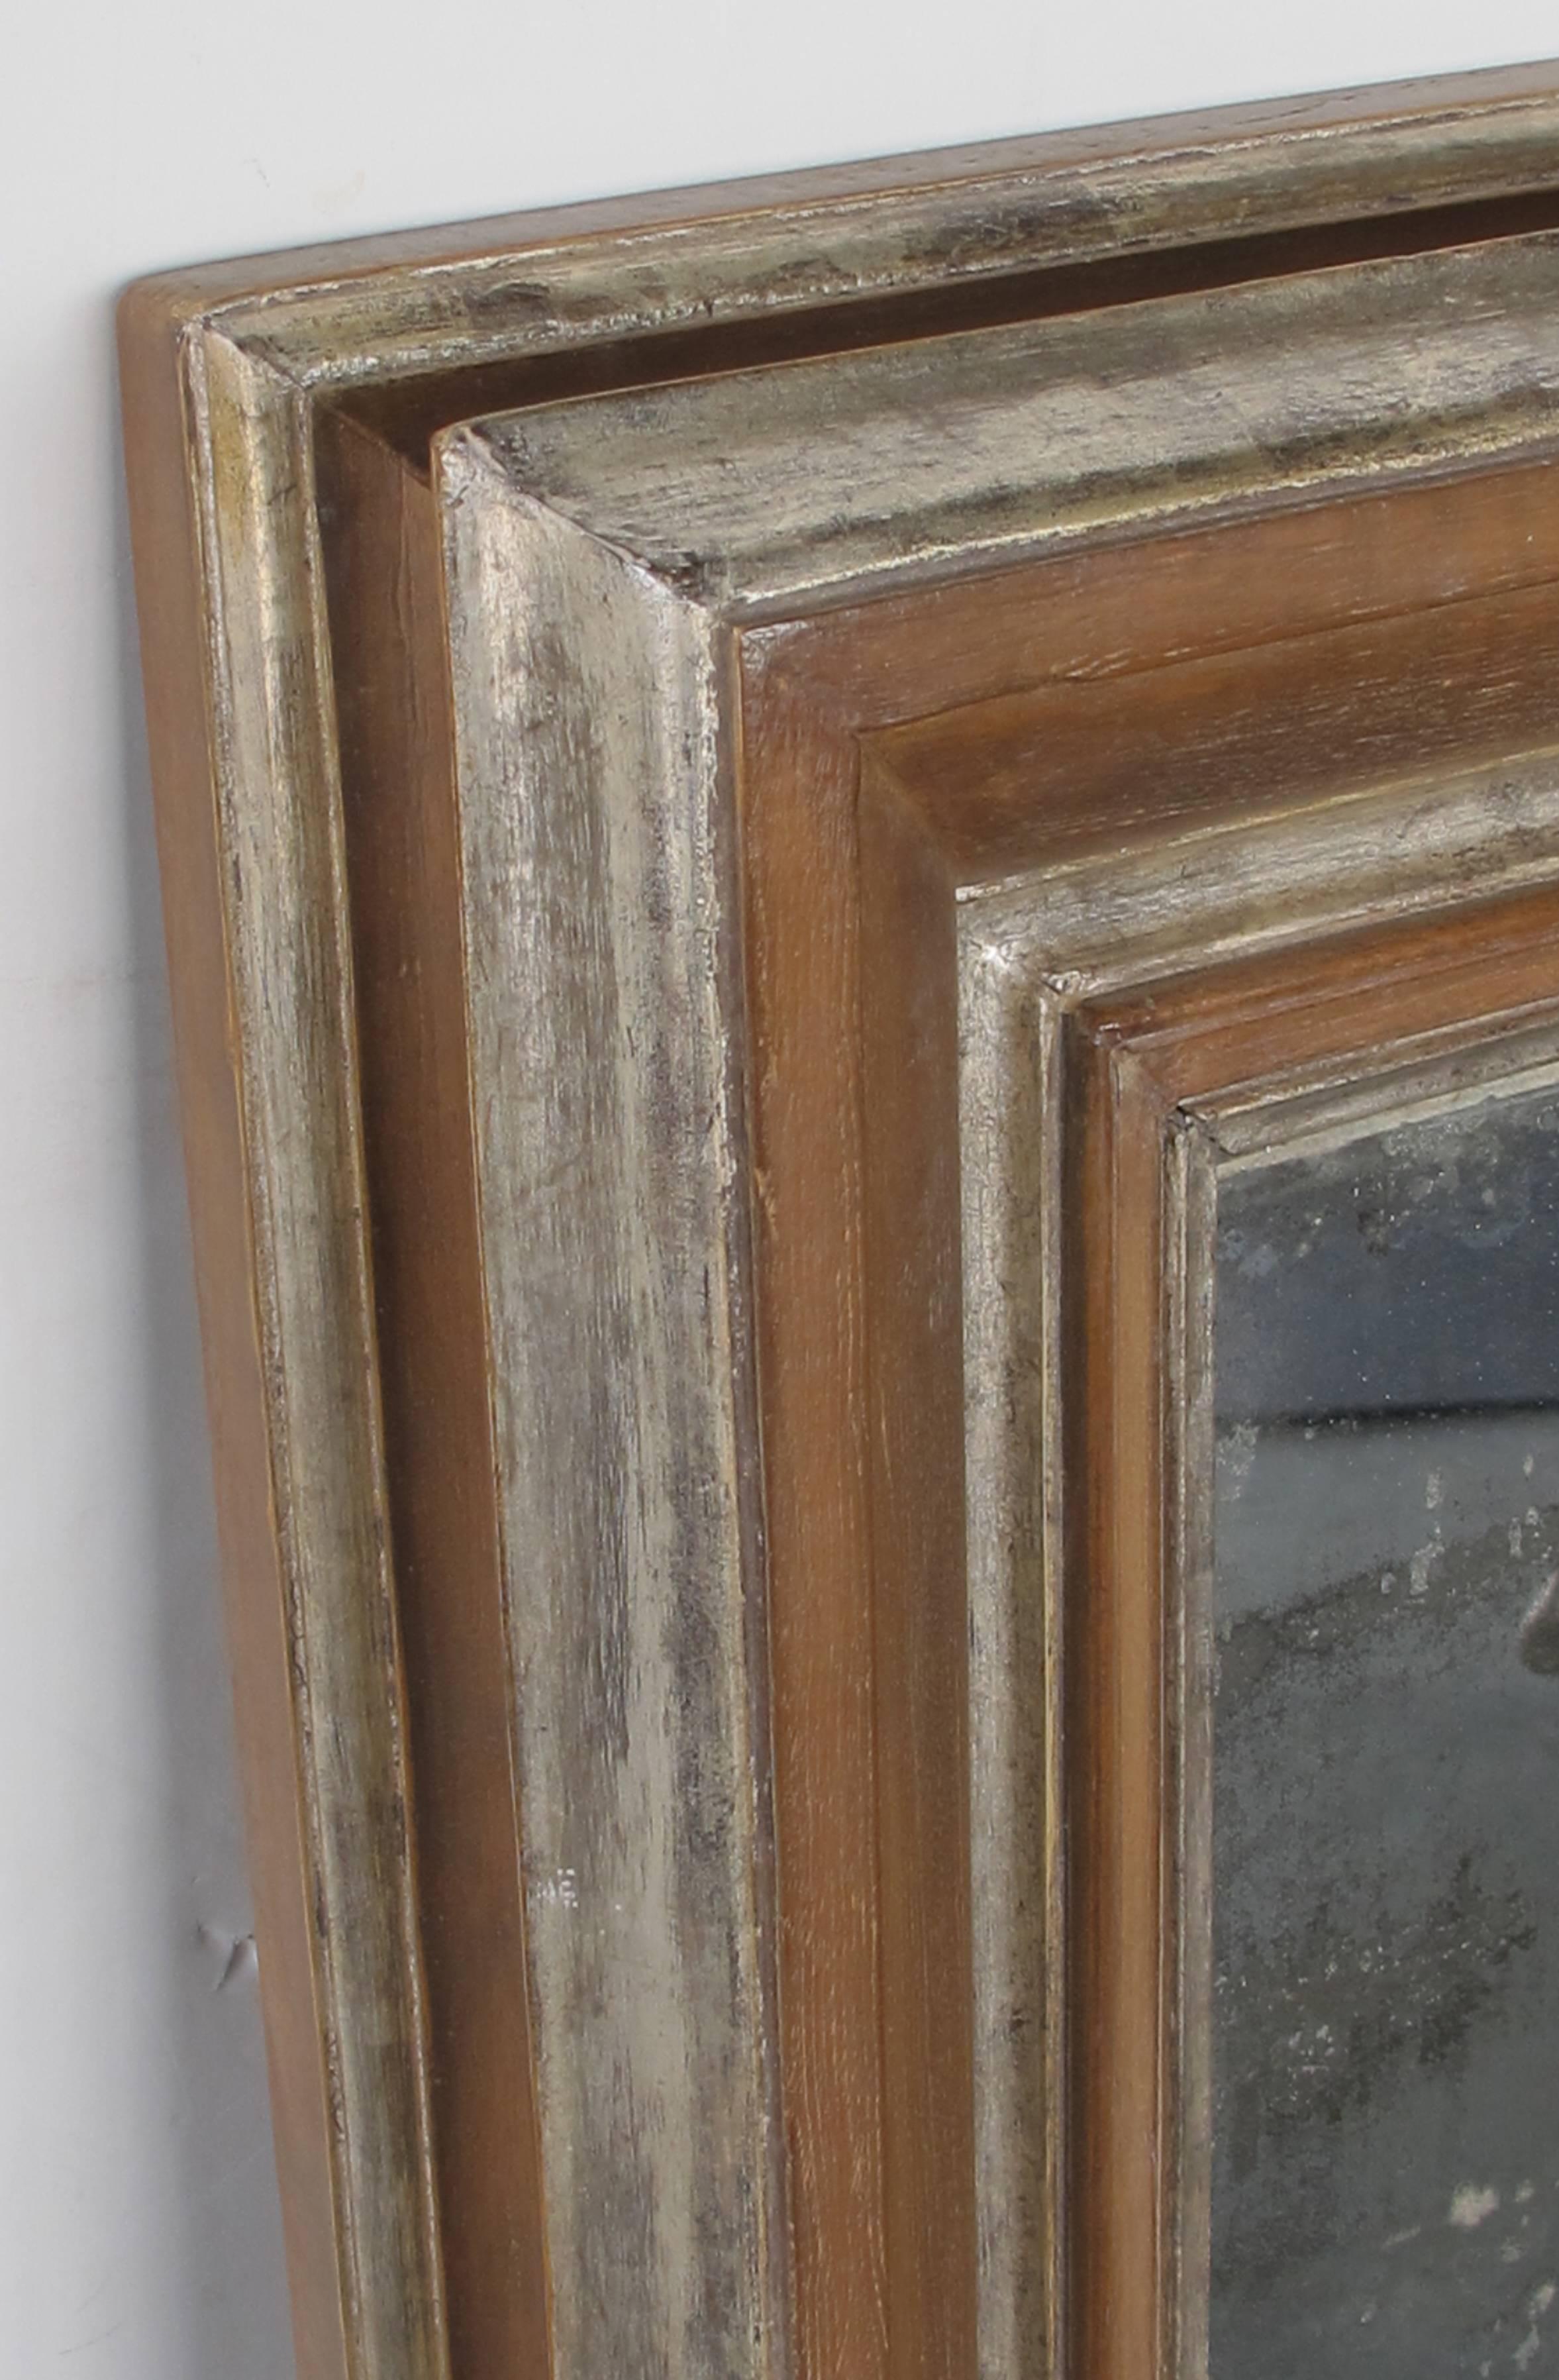 The thick and robust beechwood frame with silver-gilt accents surrounding the original antiqued mirror plate.